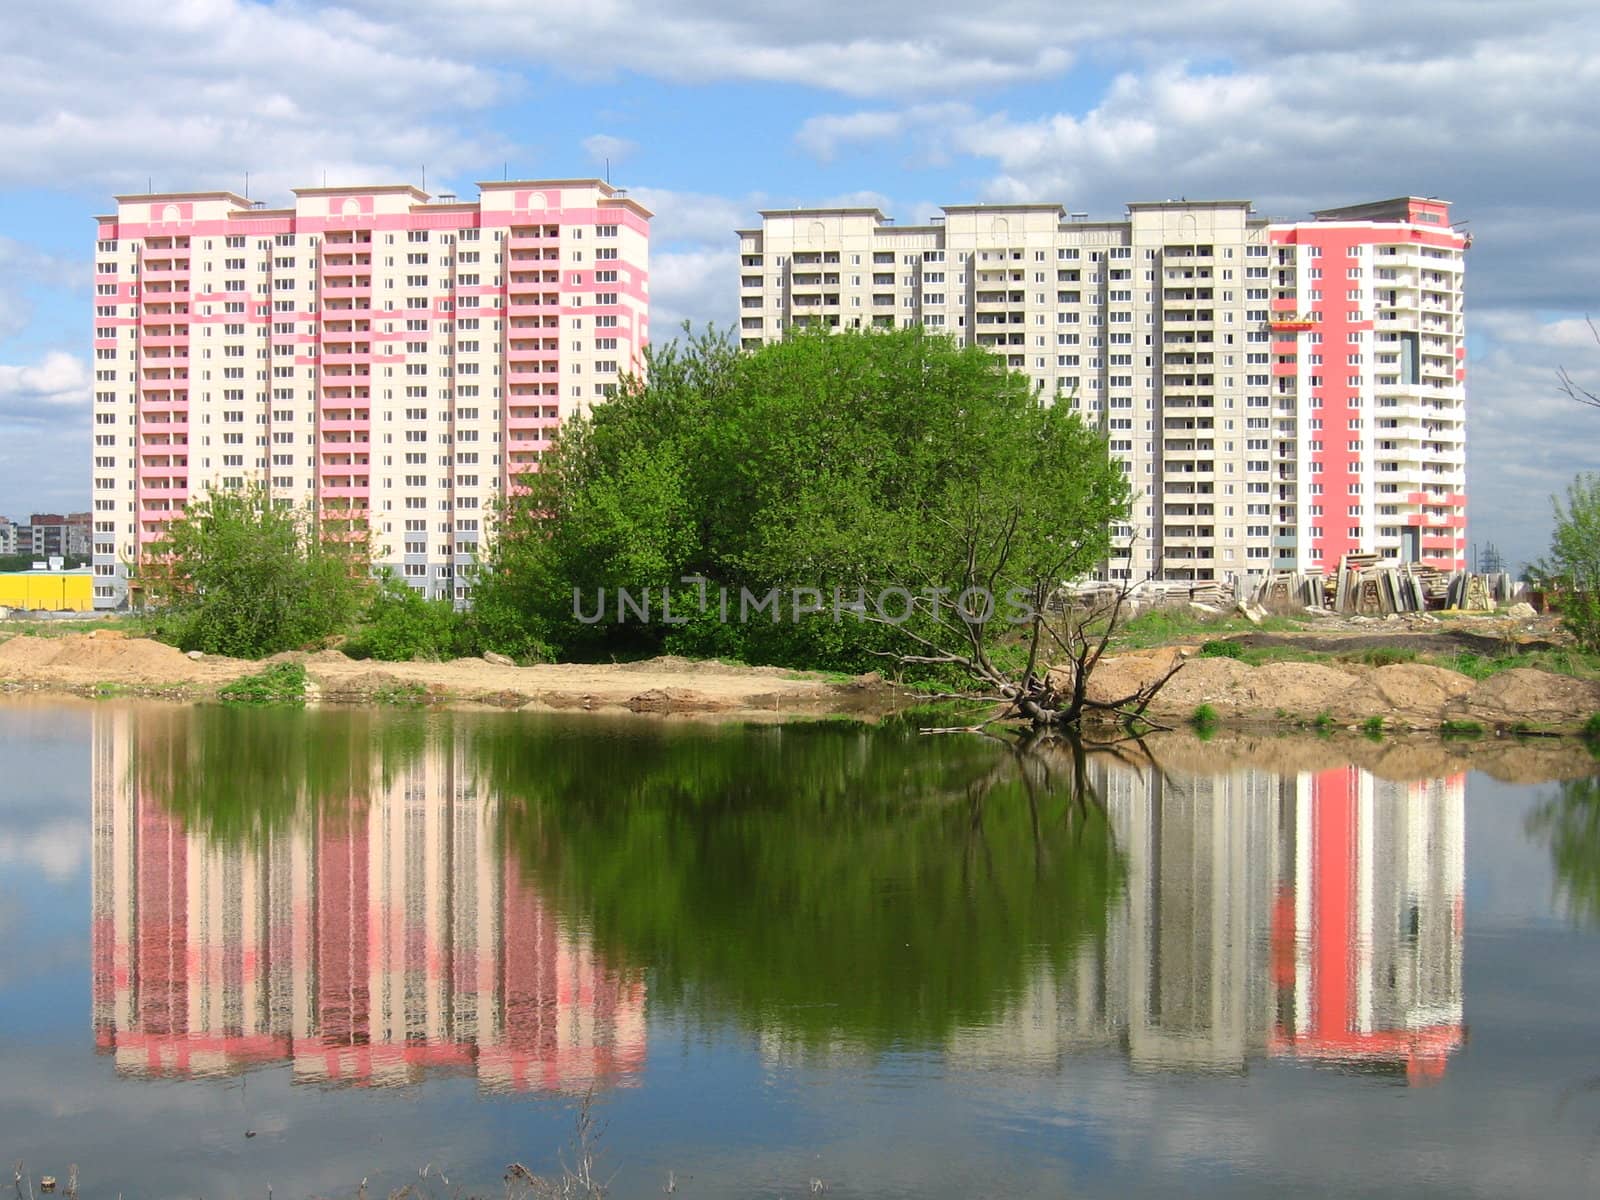 Very beautiful urban houses reflection in water